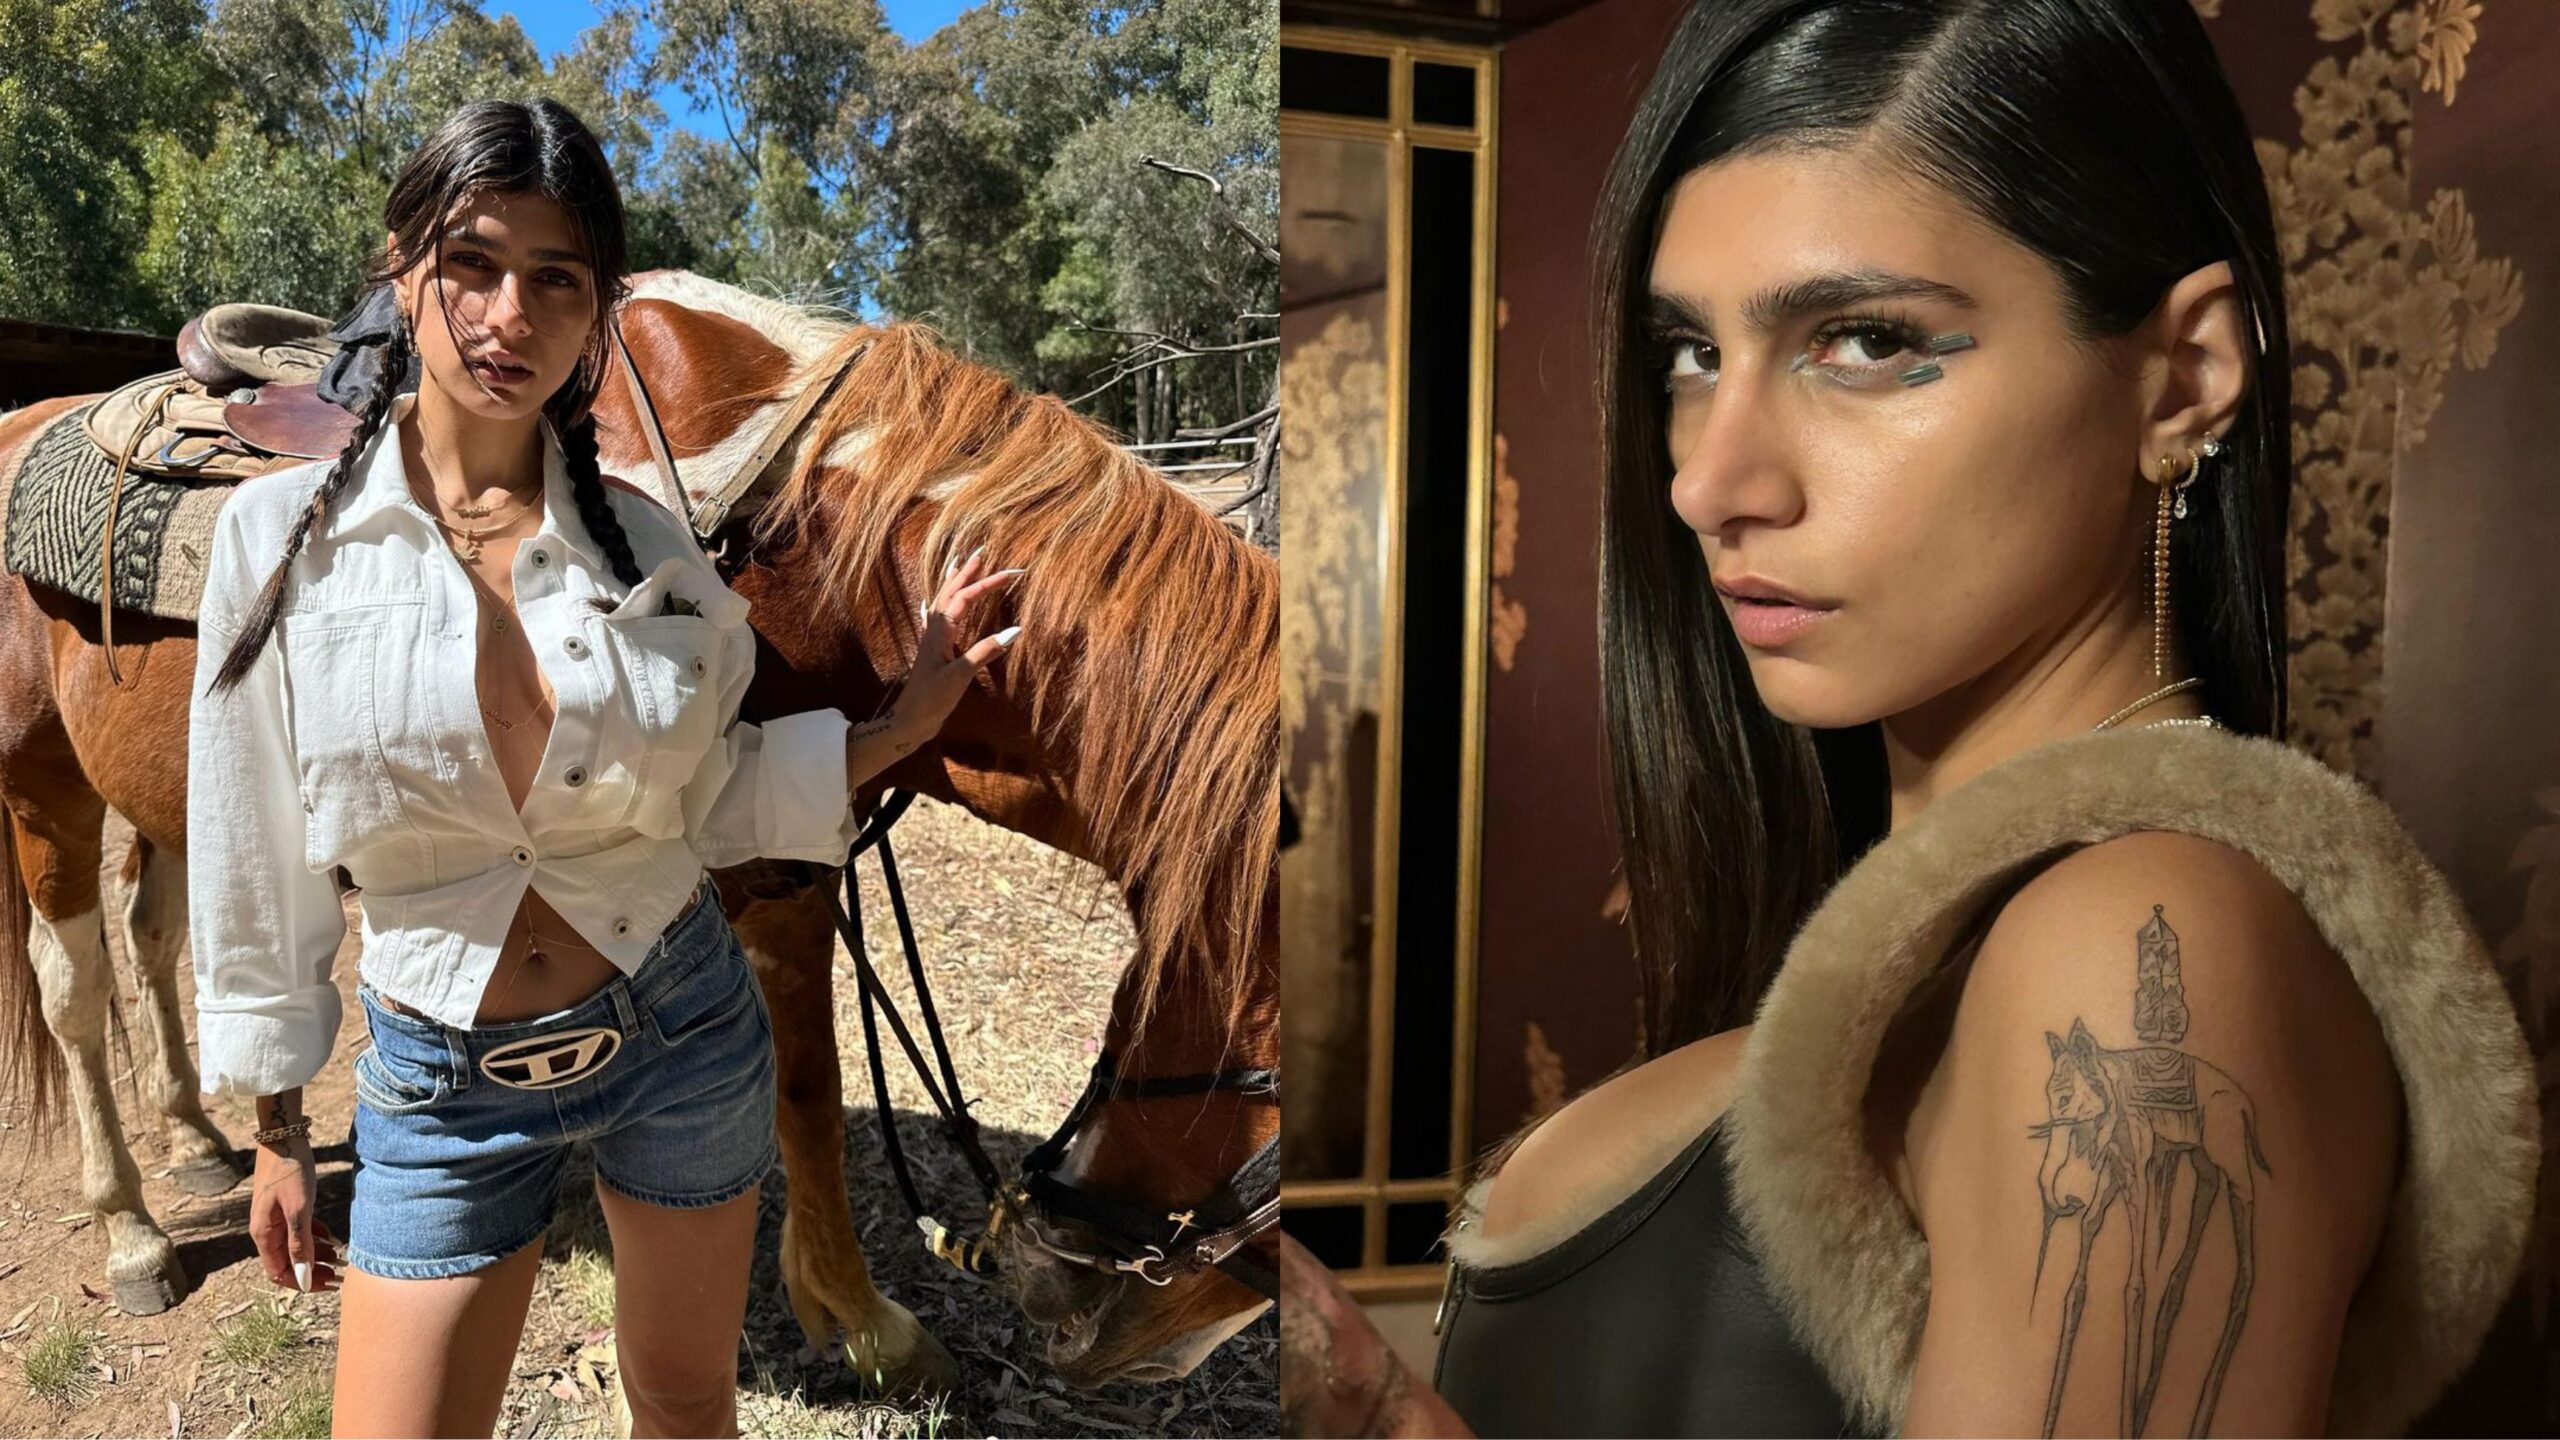 Mia Khalifa stands with Palestine & asks Hamas fighters to flip their phones